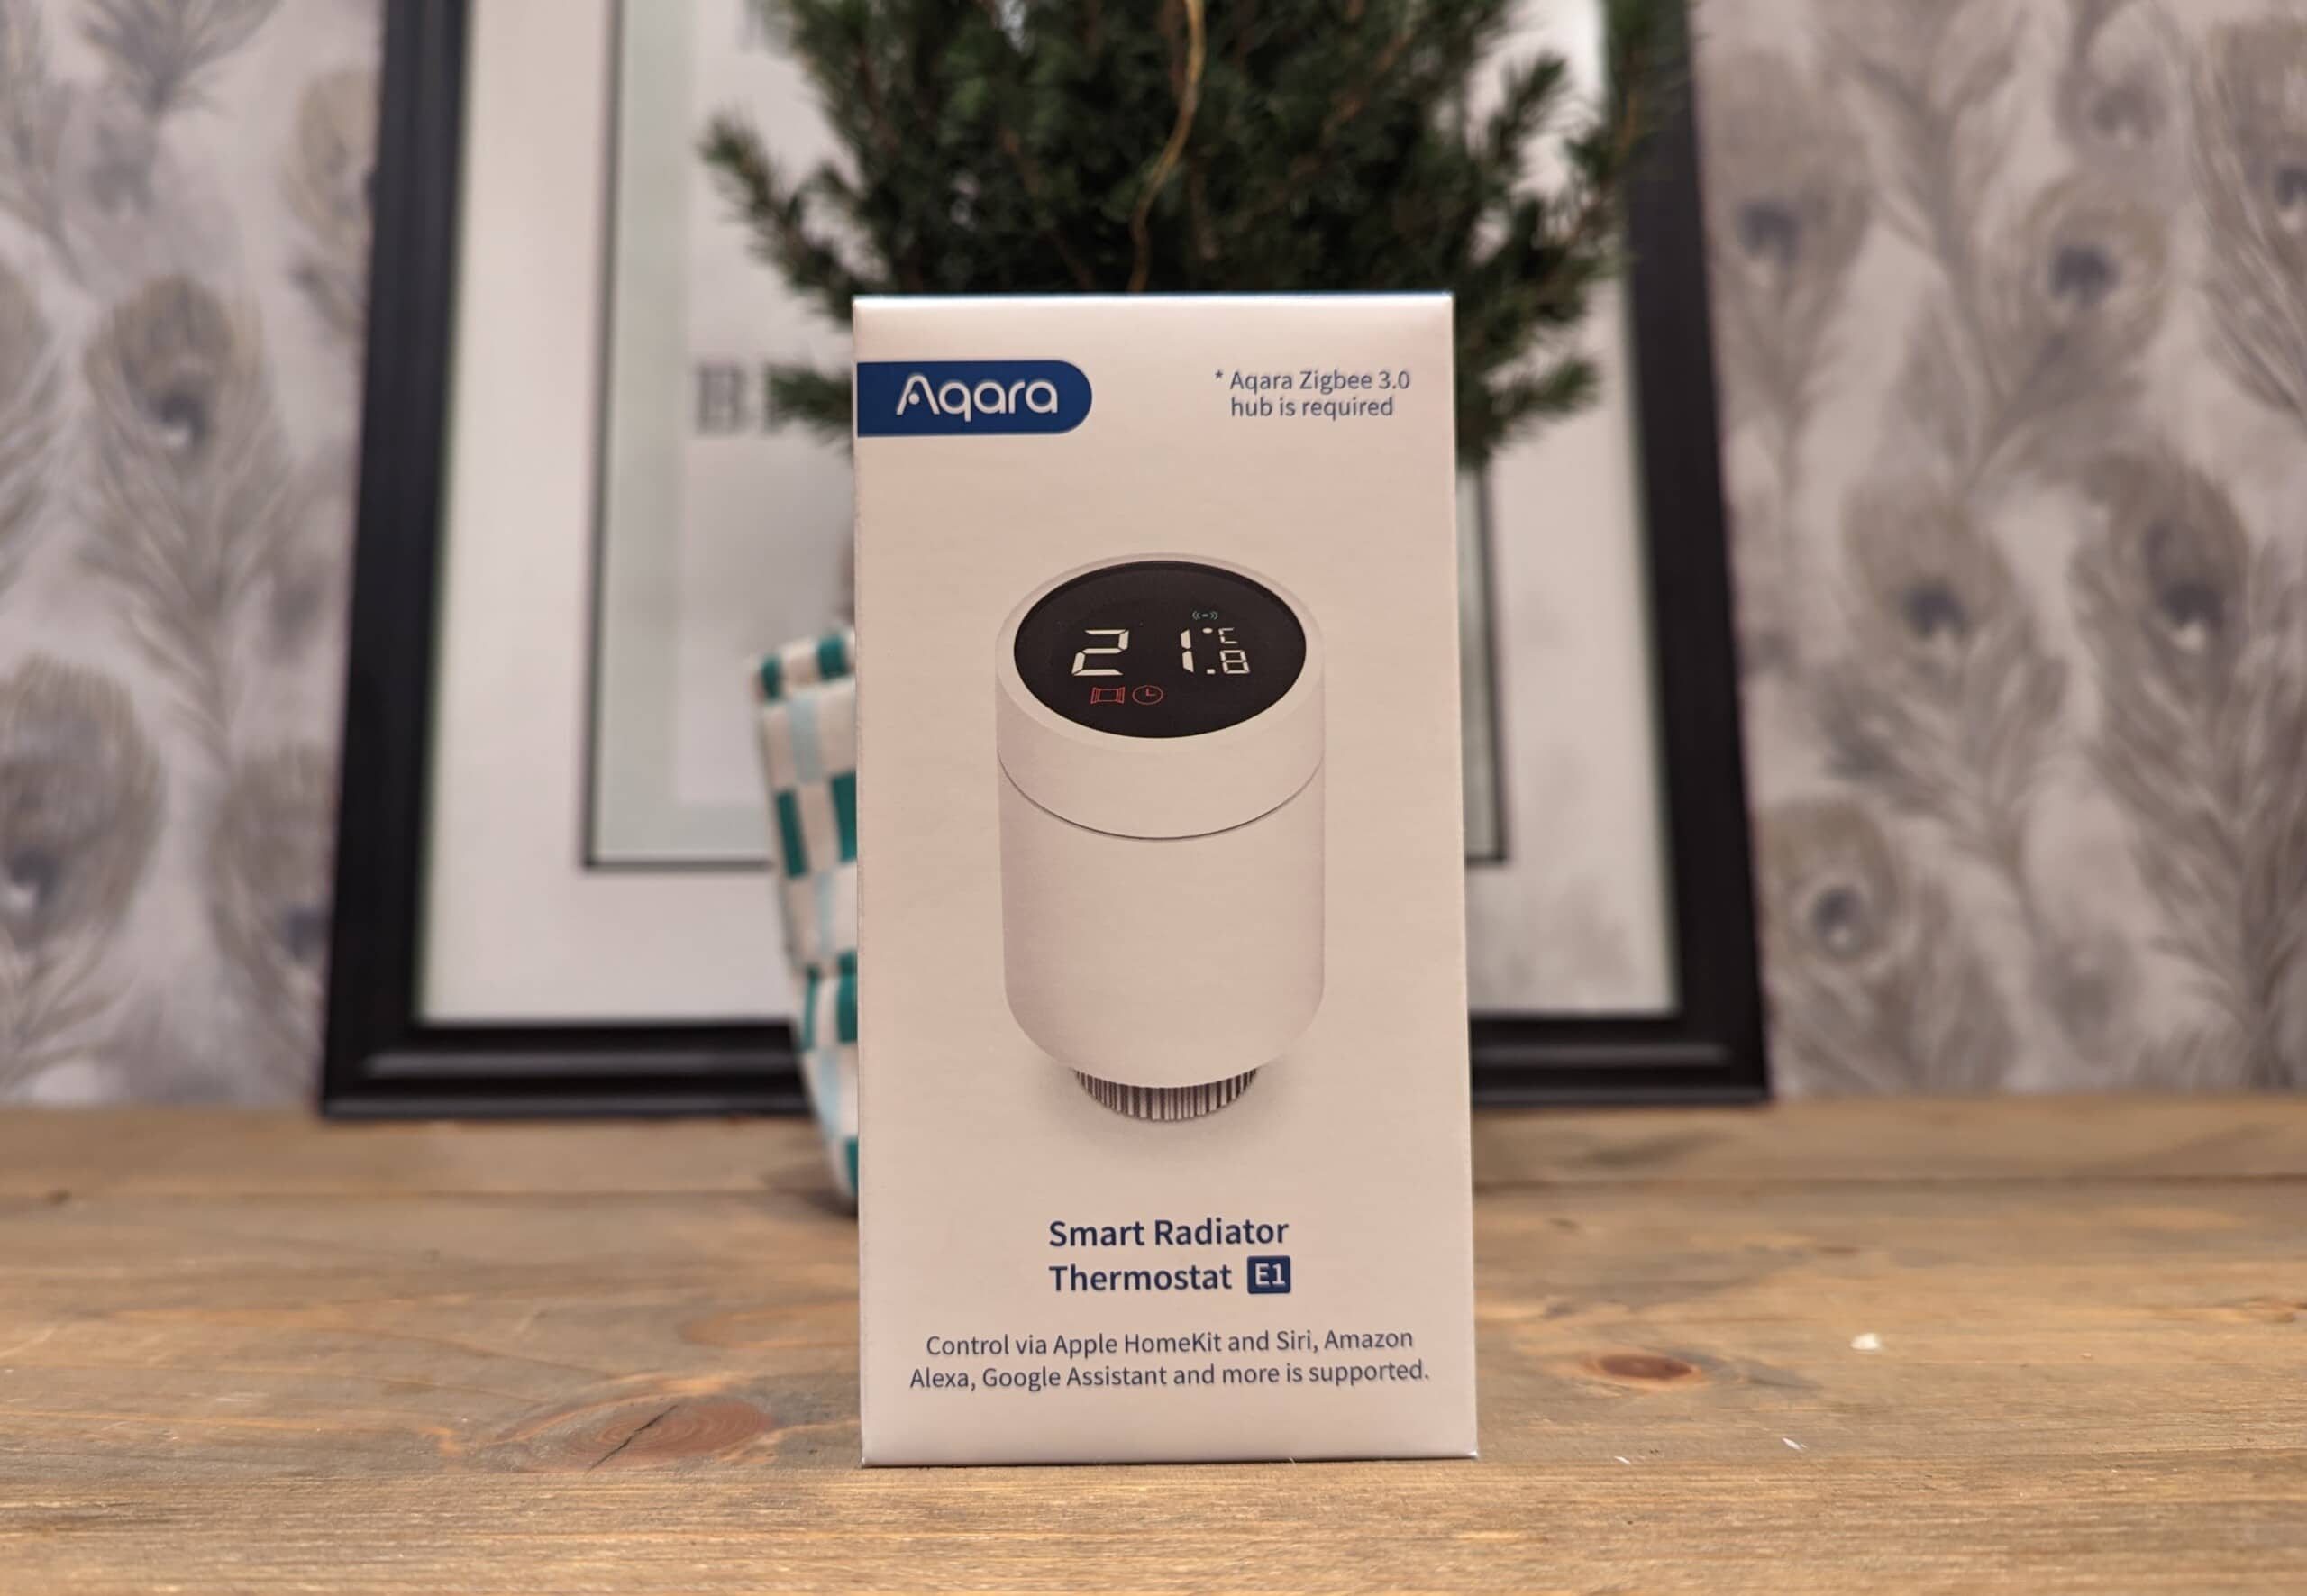 Aqara Smart Radiator Thermostat E1 Valve Review – A Zigbee smart TRV with Home Assistant compatibility